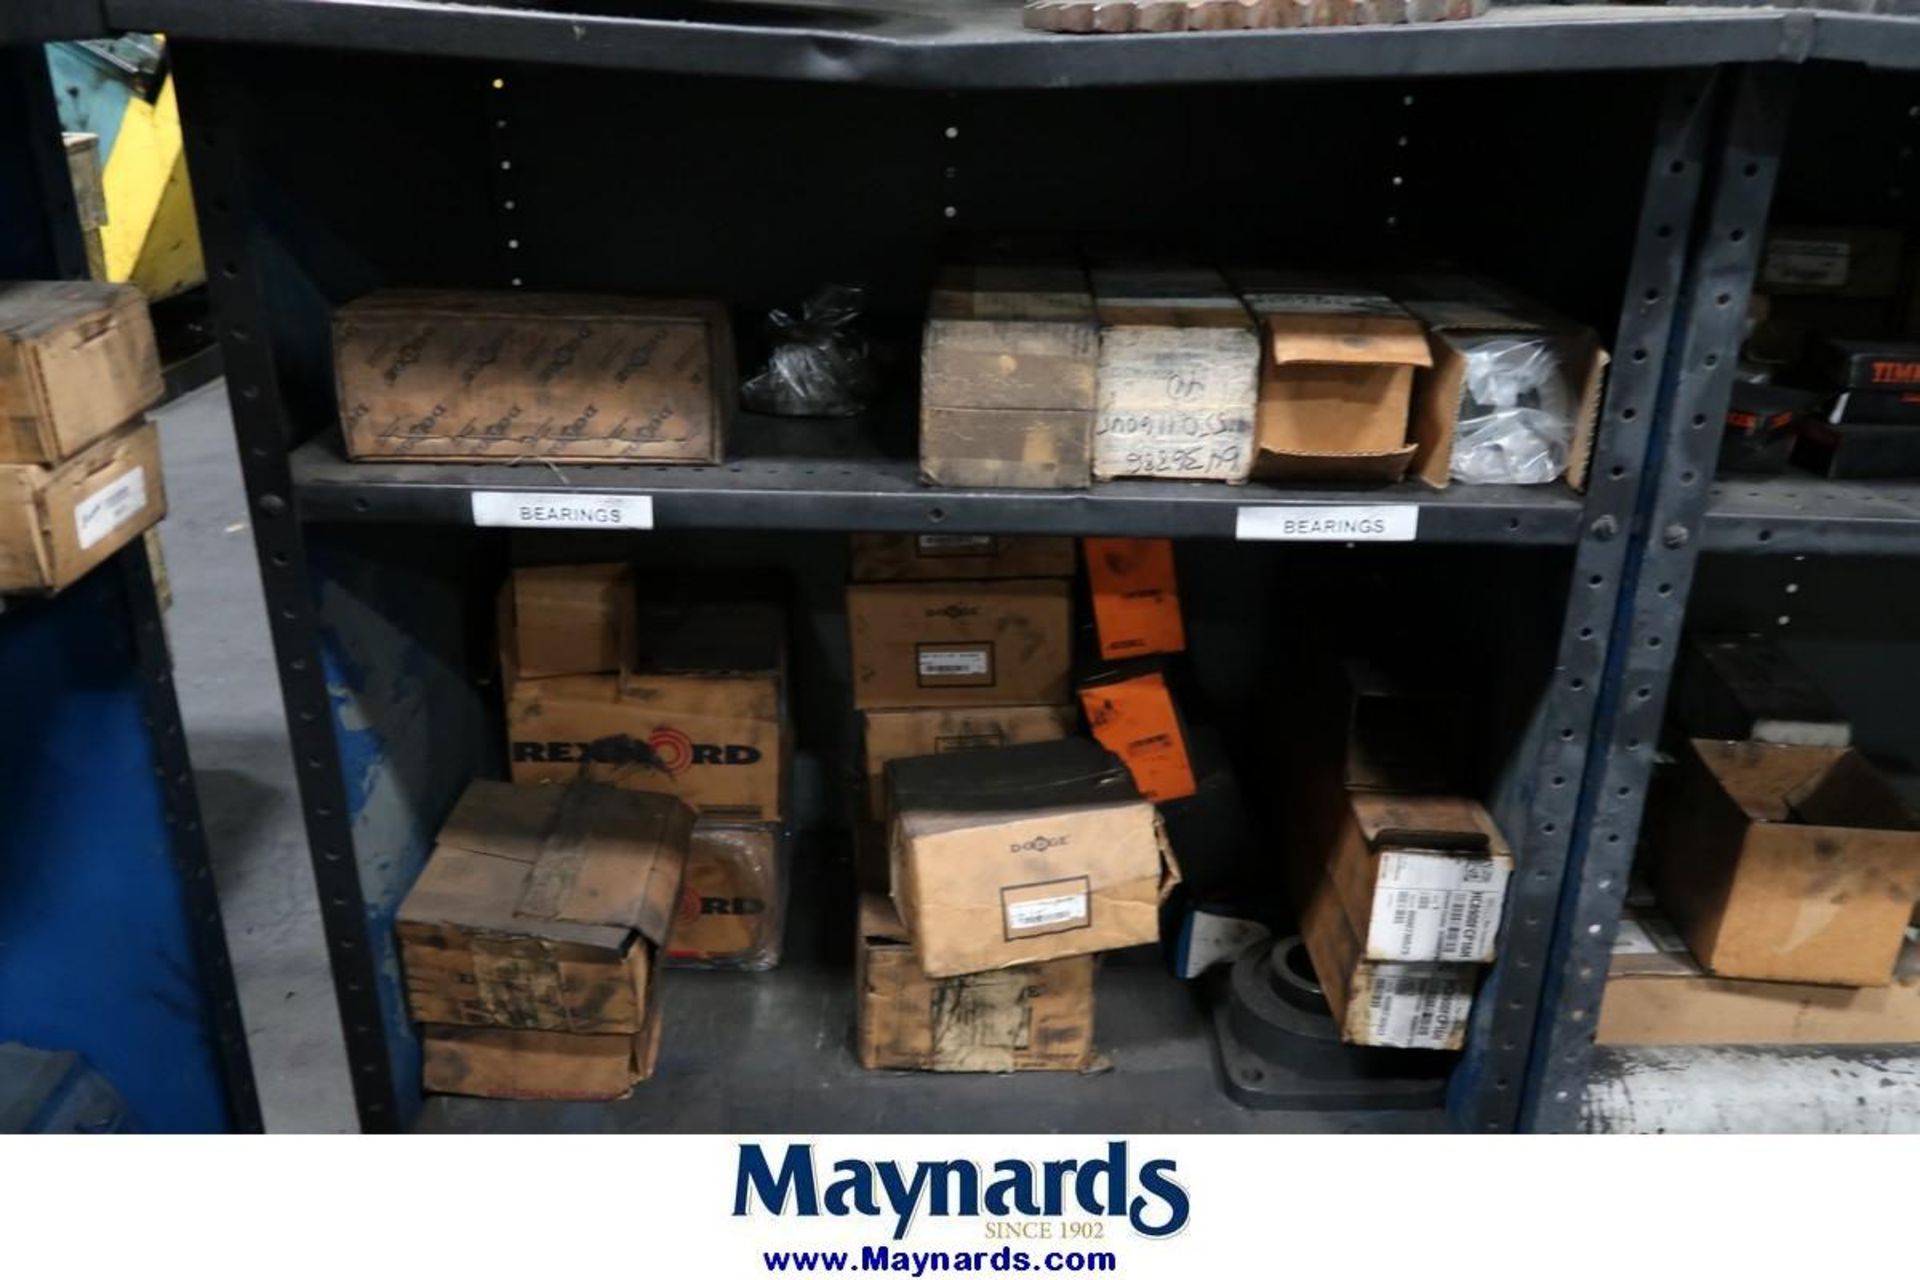 Adjustable Steel Shelving Units with Contents of Heat Treat Spare Parts - Image 10 of 16